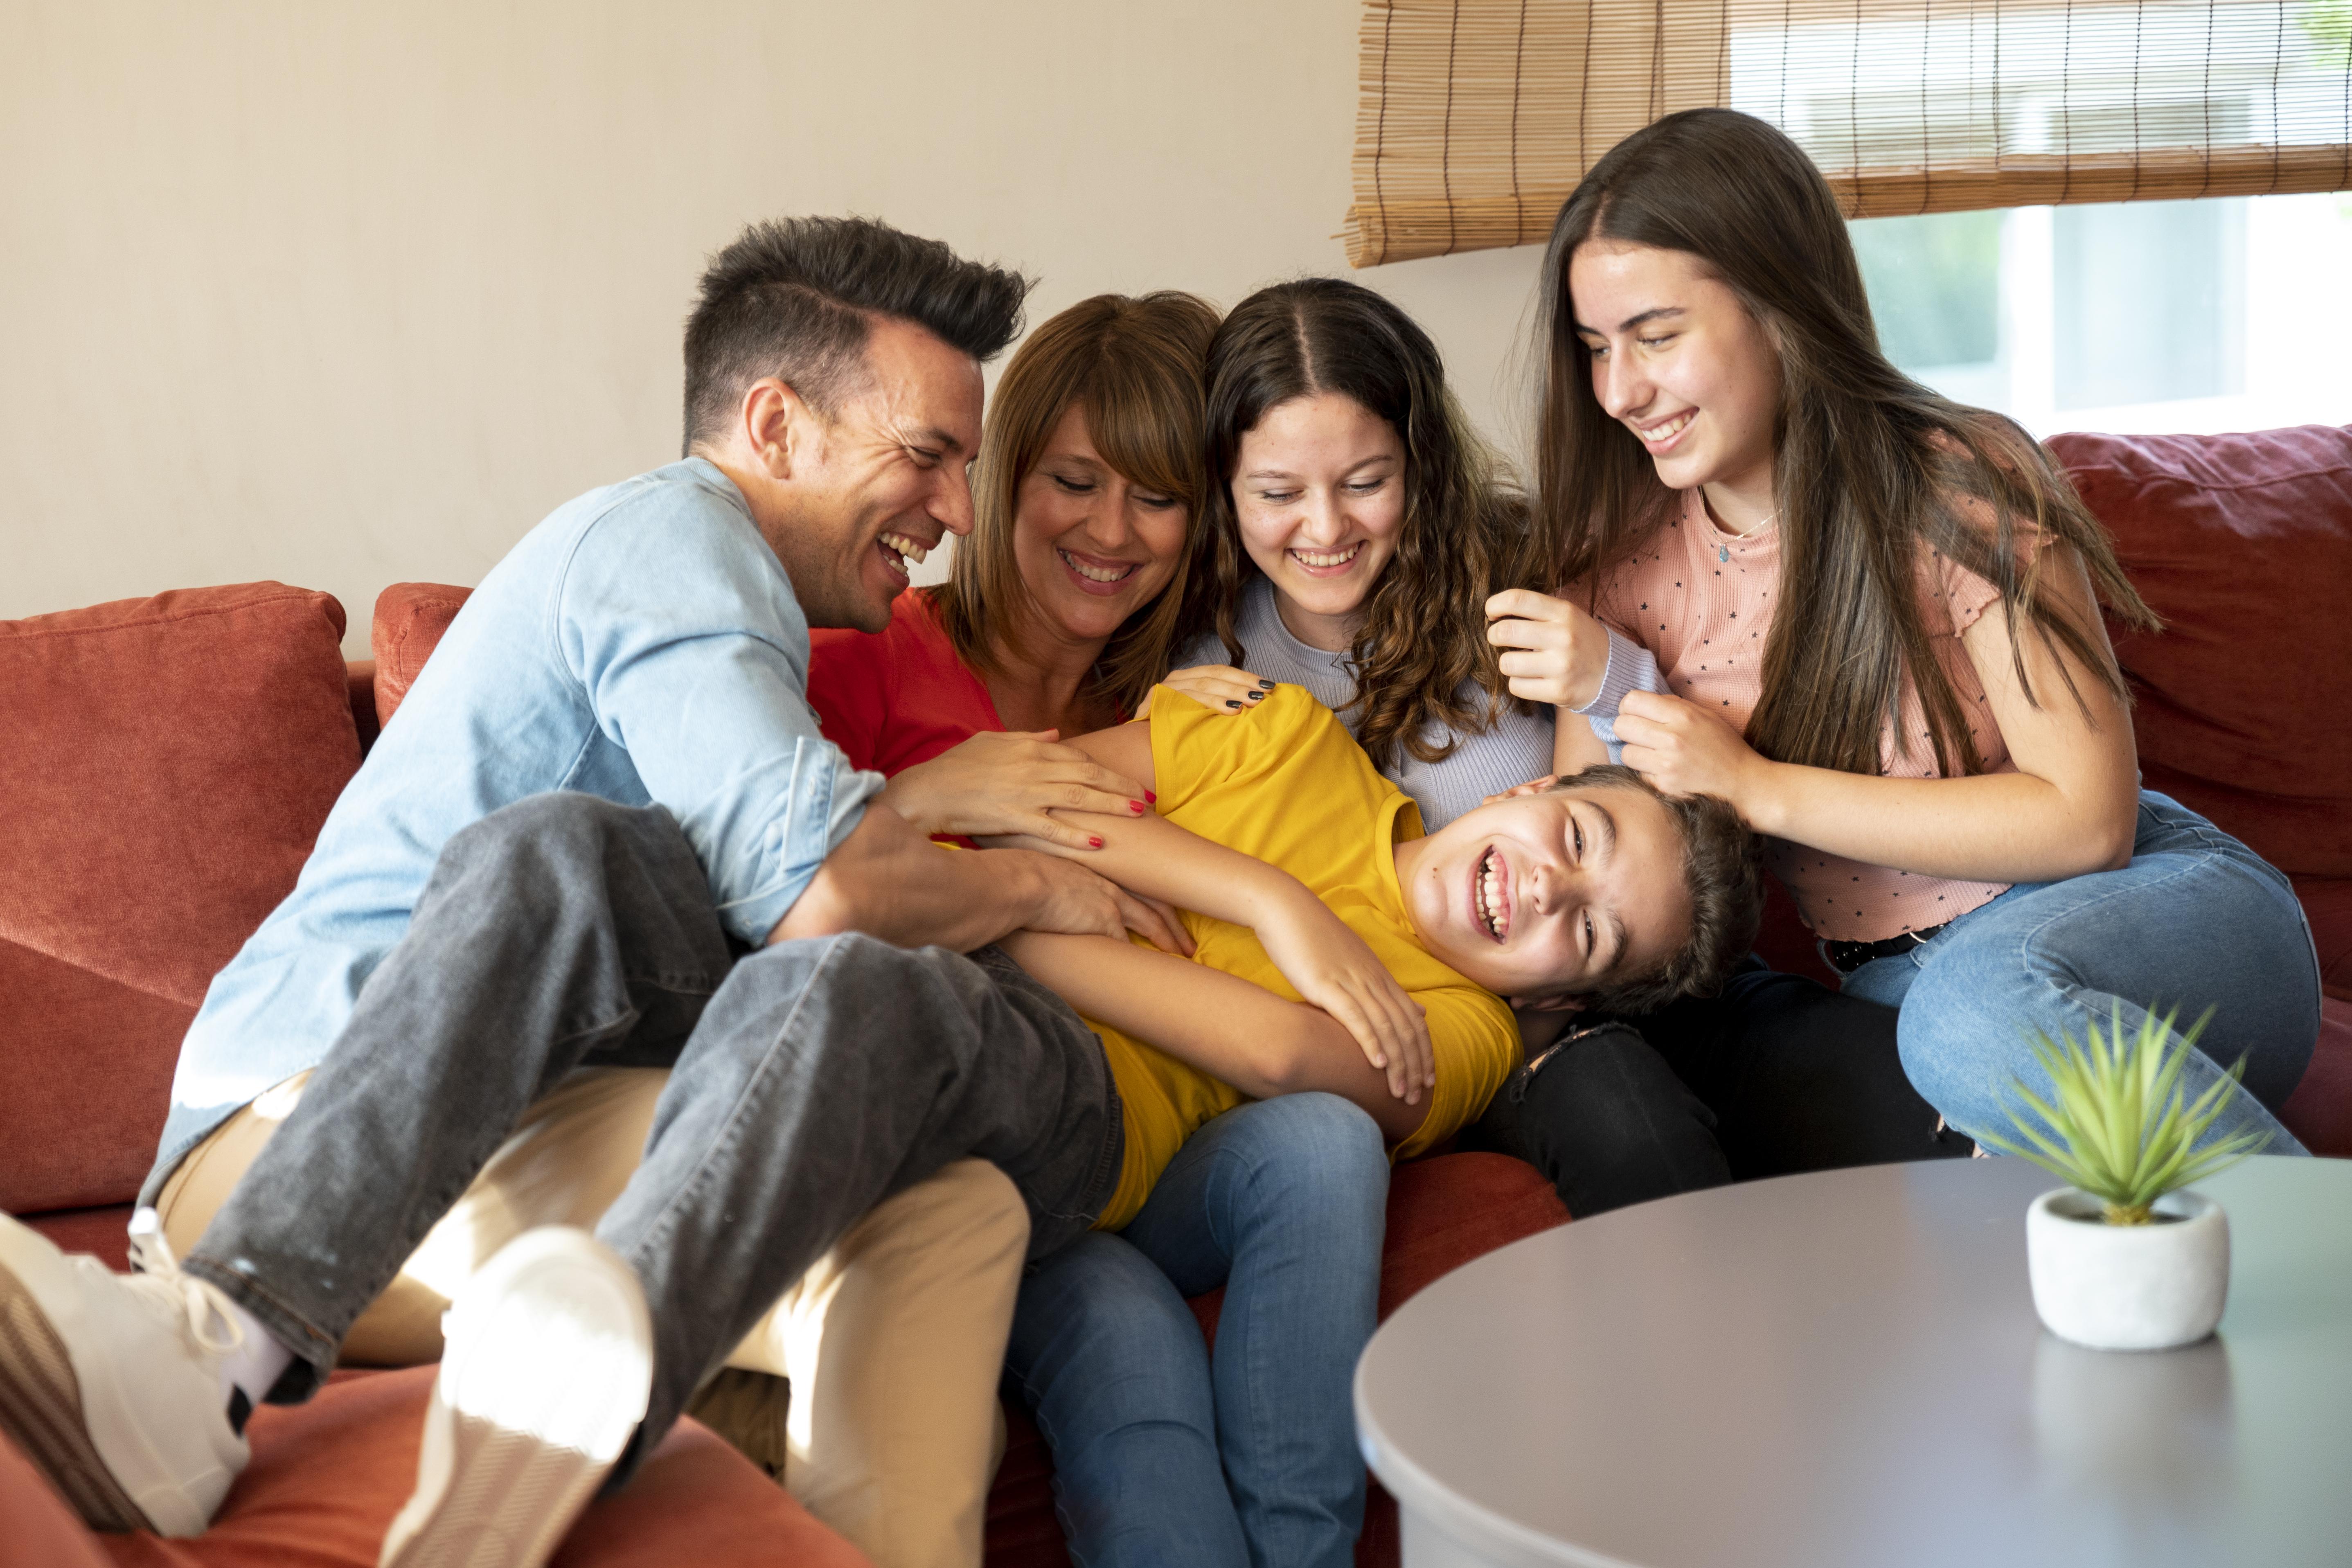 family-with-parents-and-kids-having-fun-on-the-couch-together